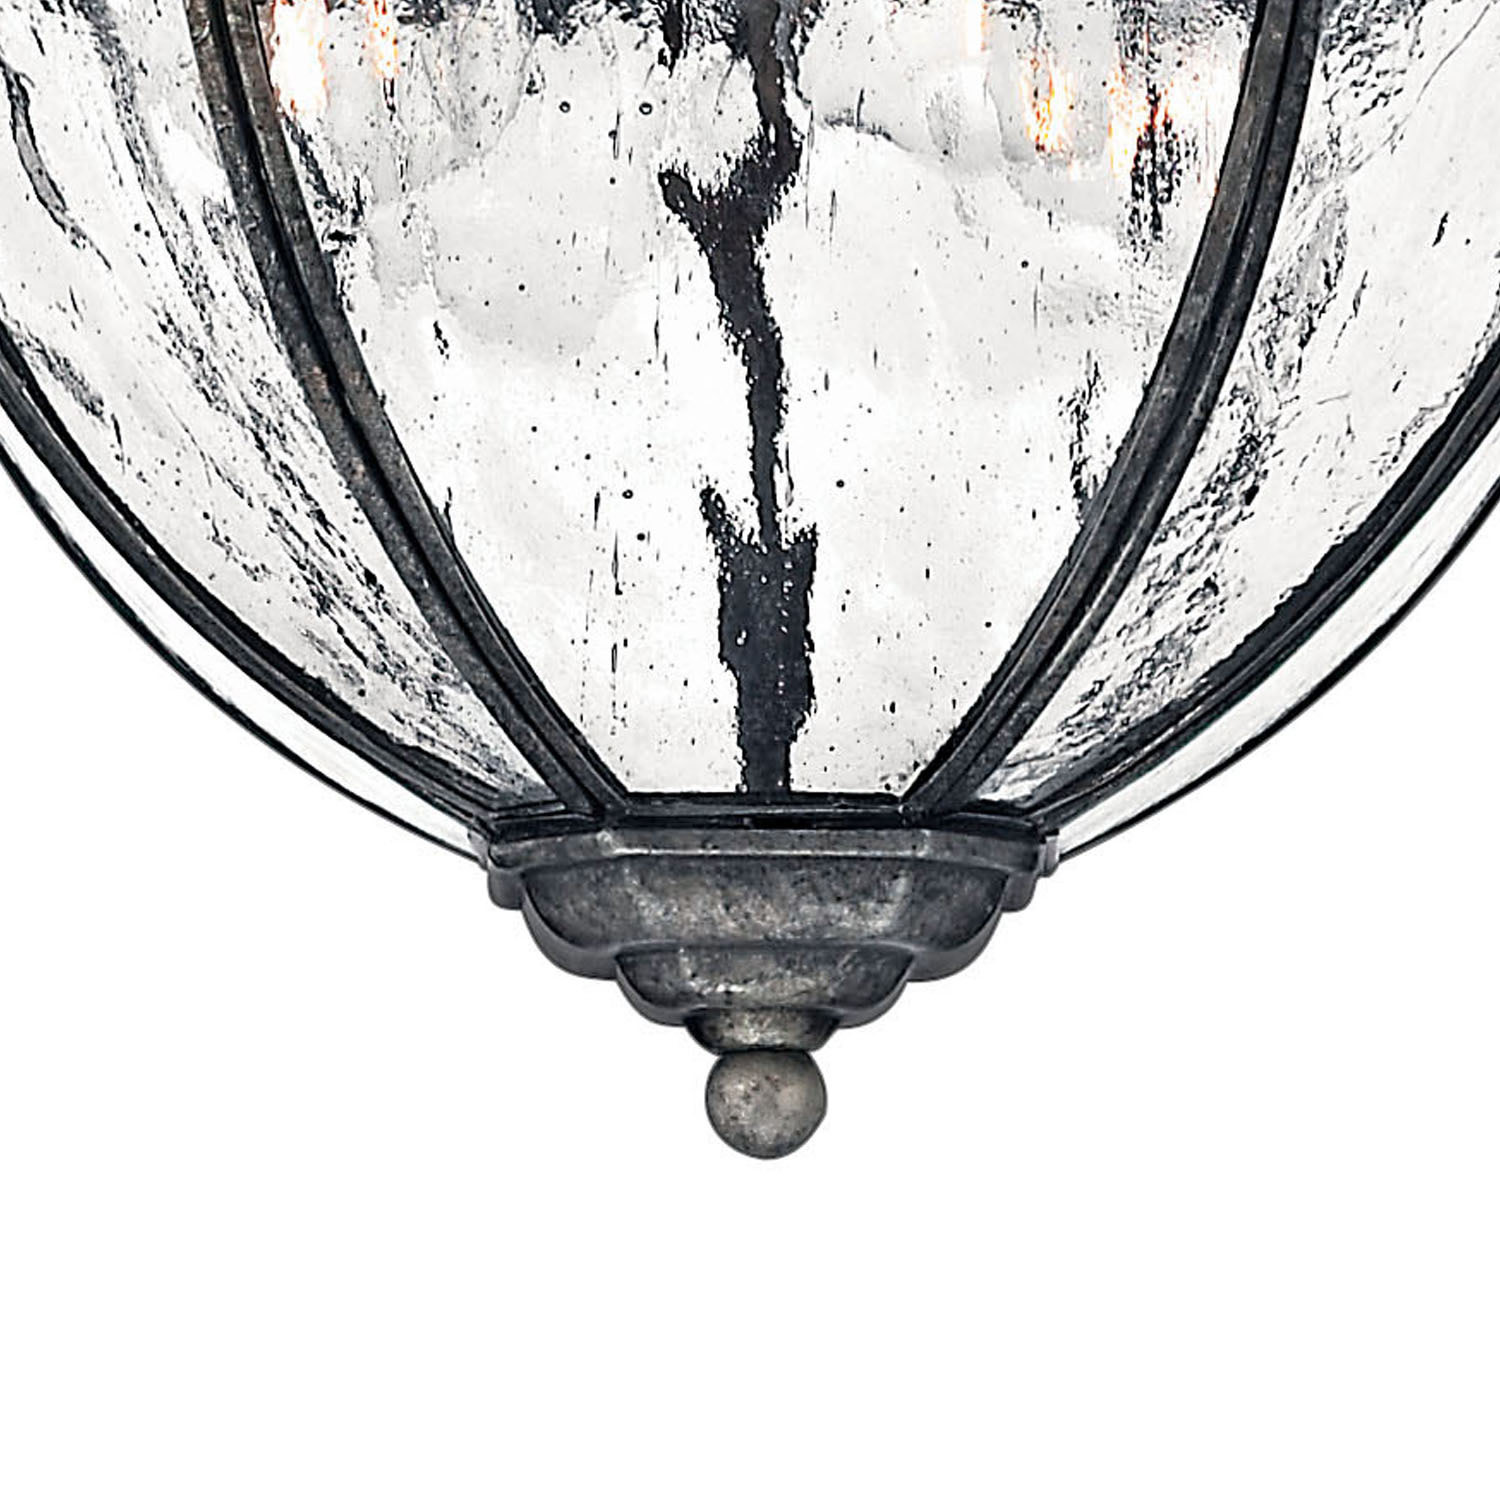 Hinkley Lighting H1713 4 Light Outdoor Flush Mount Ceiling Fixture From The Regal - image 2 of 3